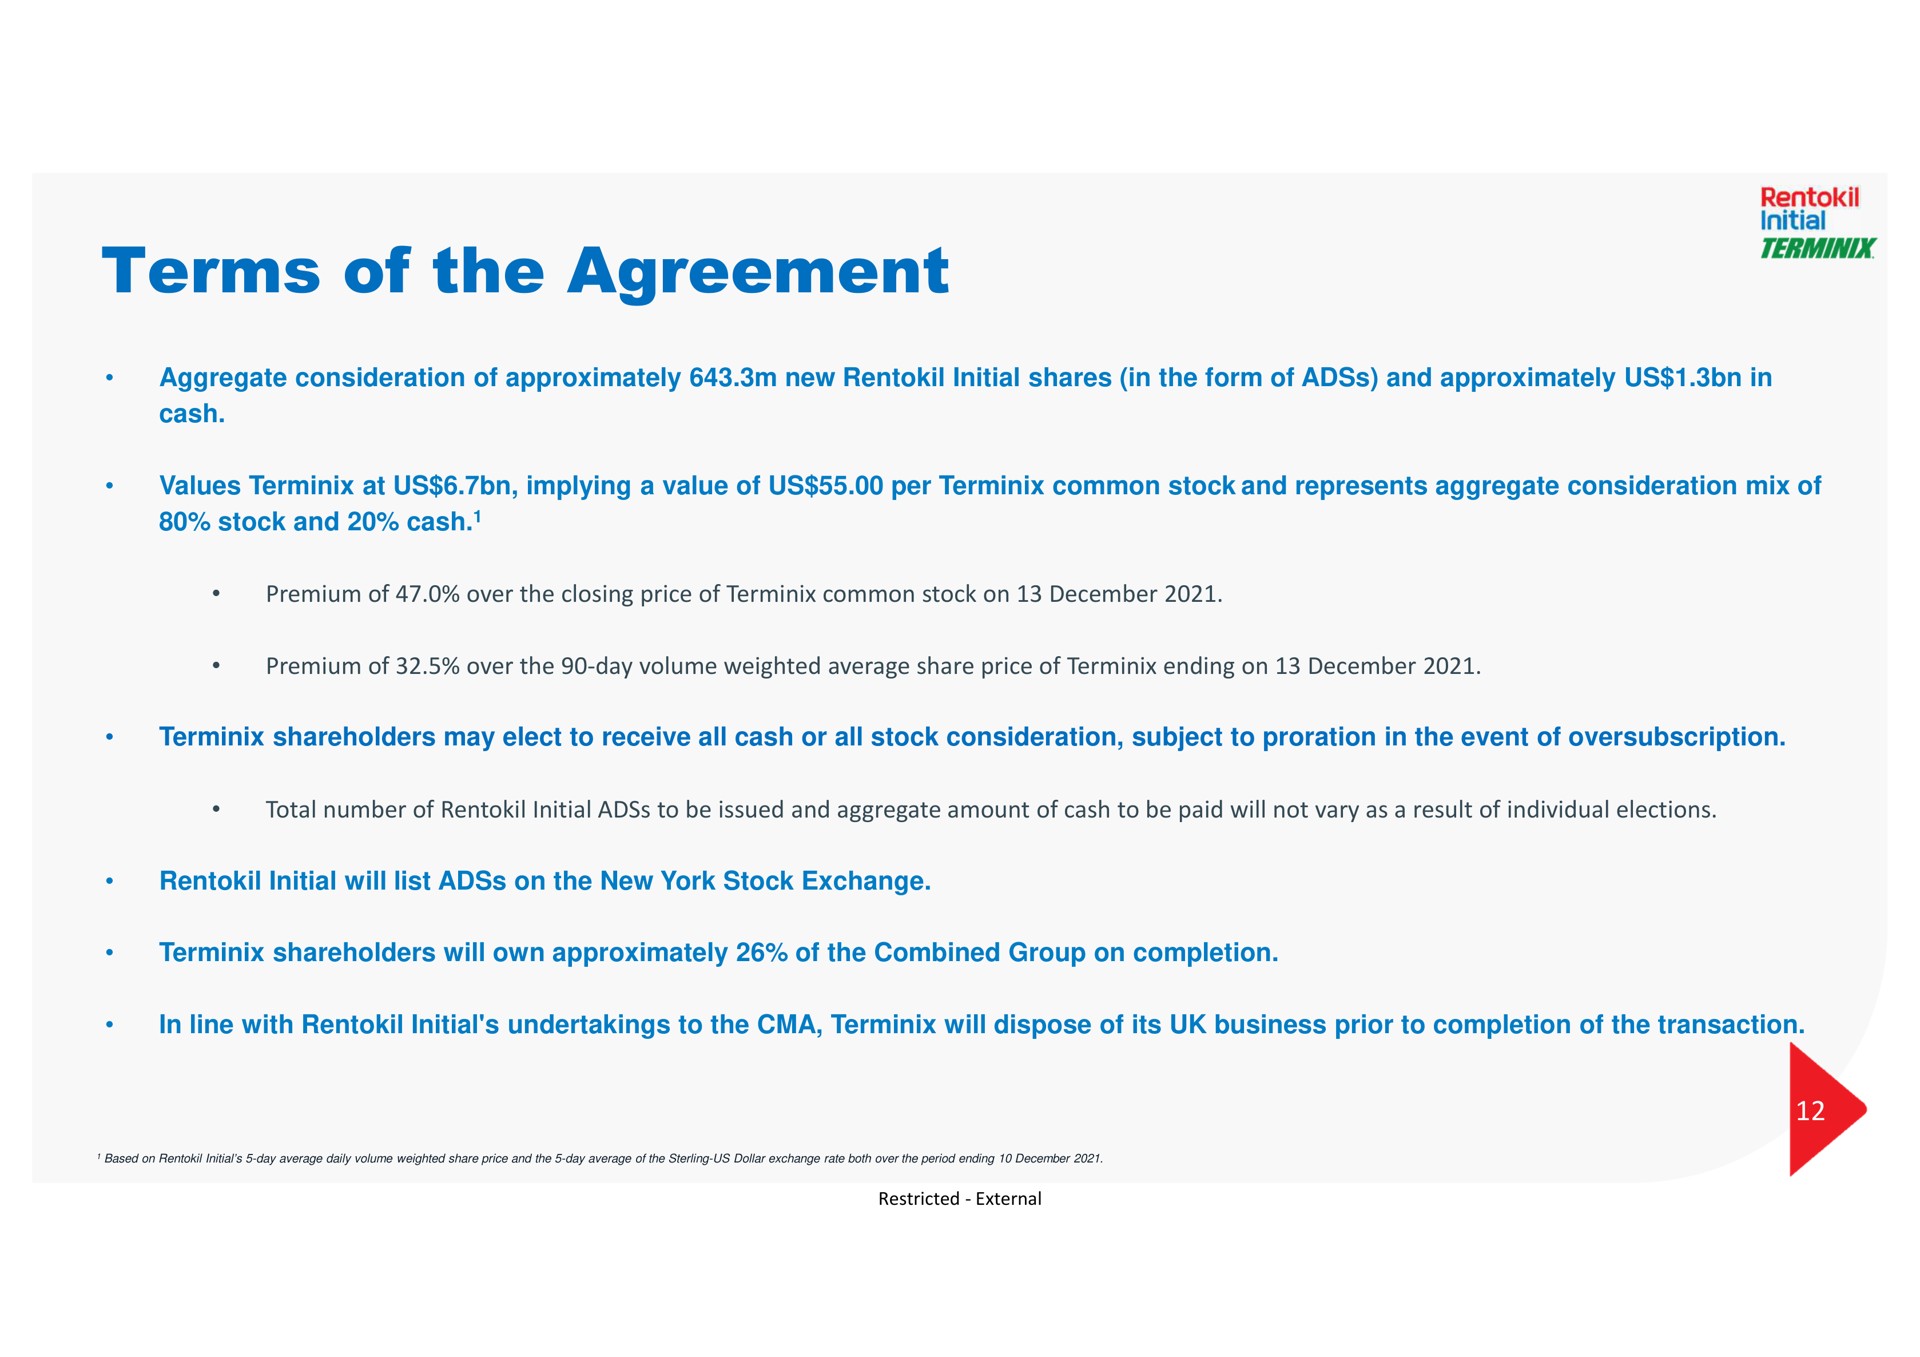 terms of the agreement | Rentokil Initial